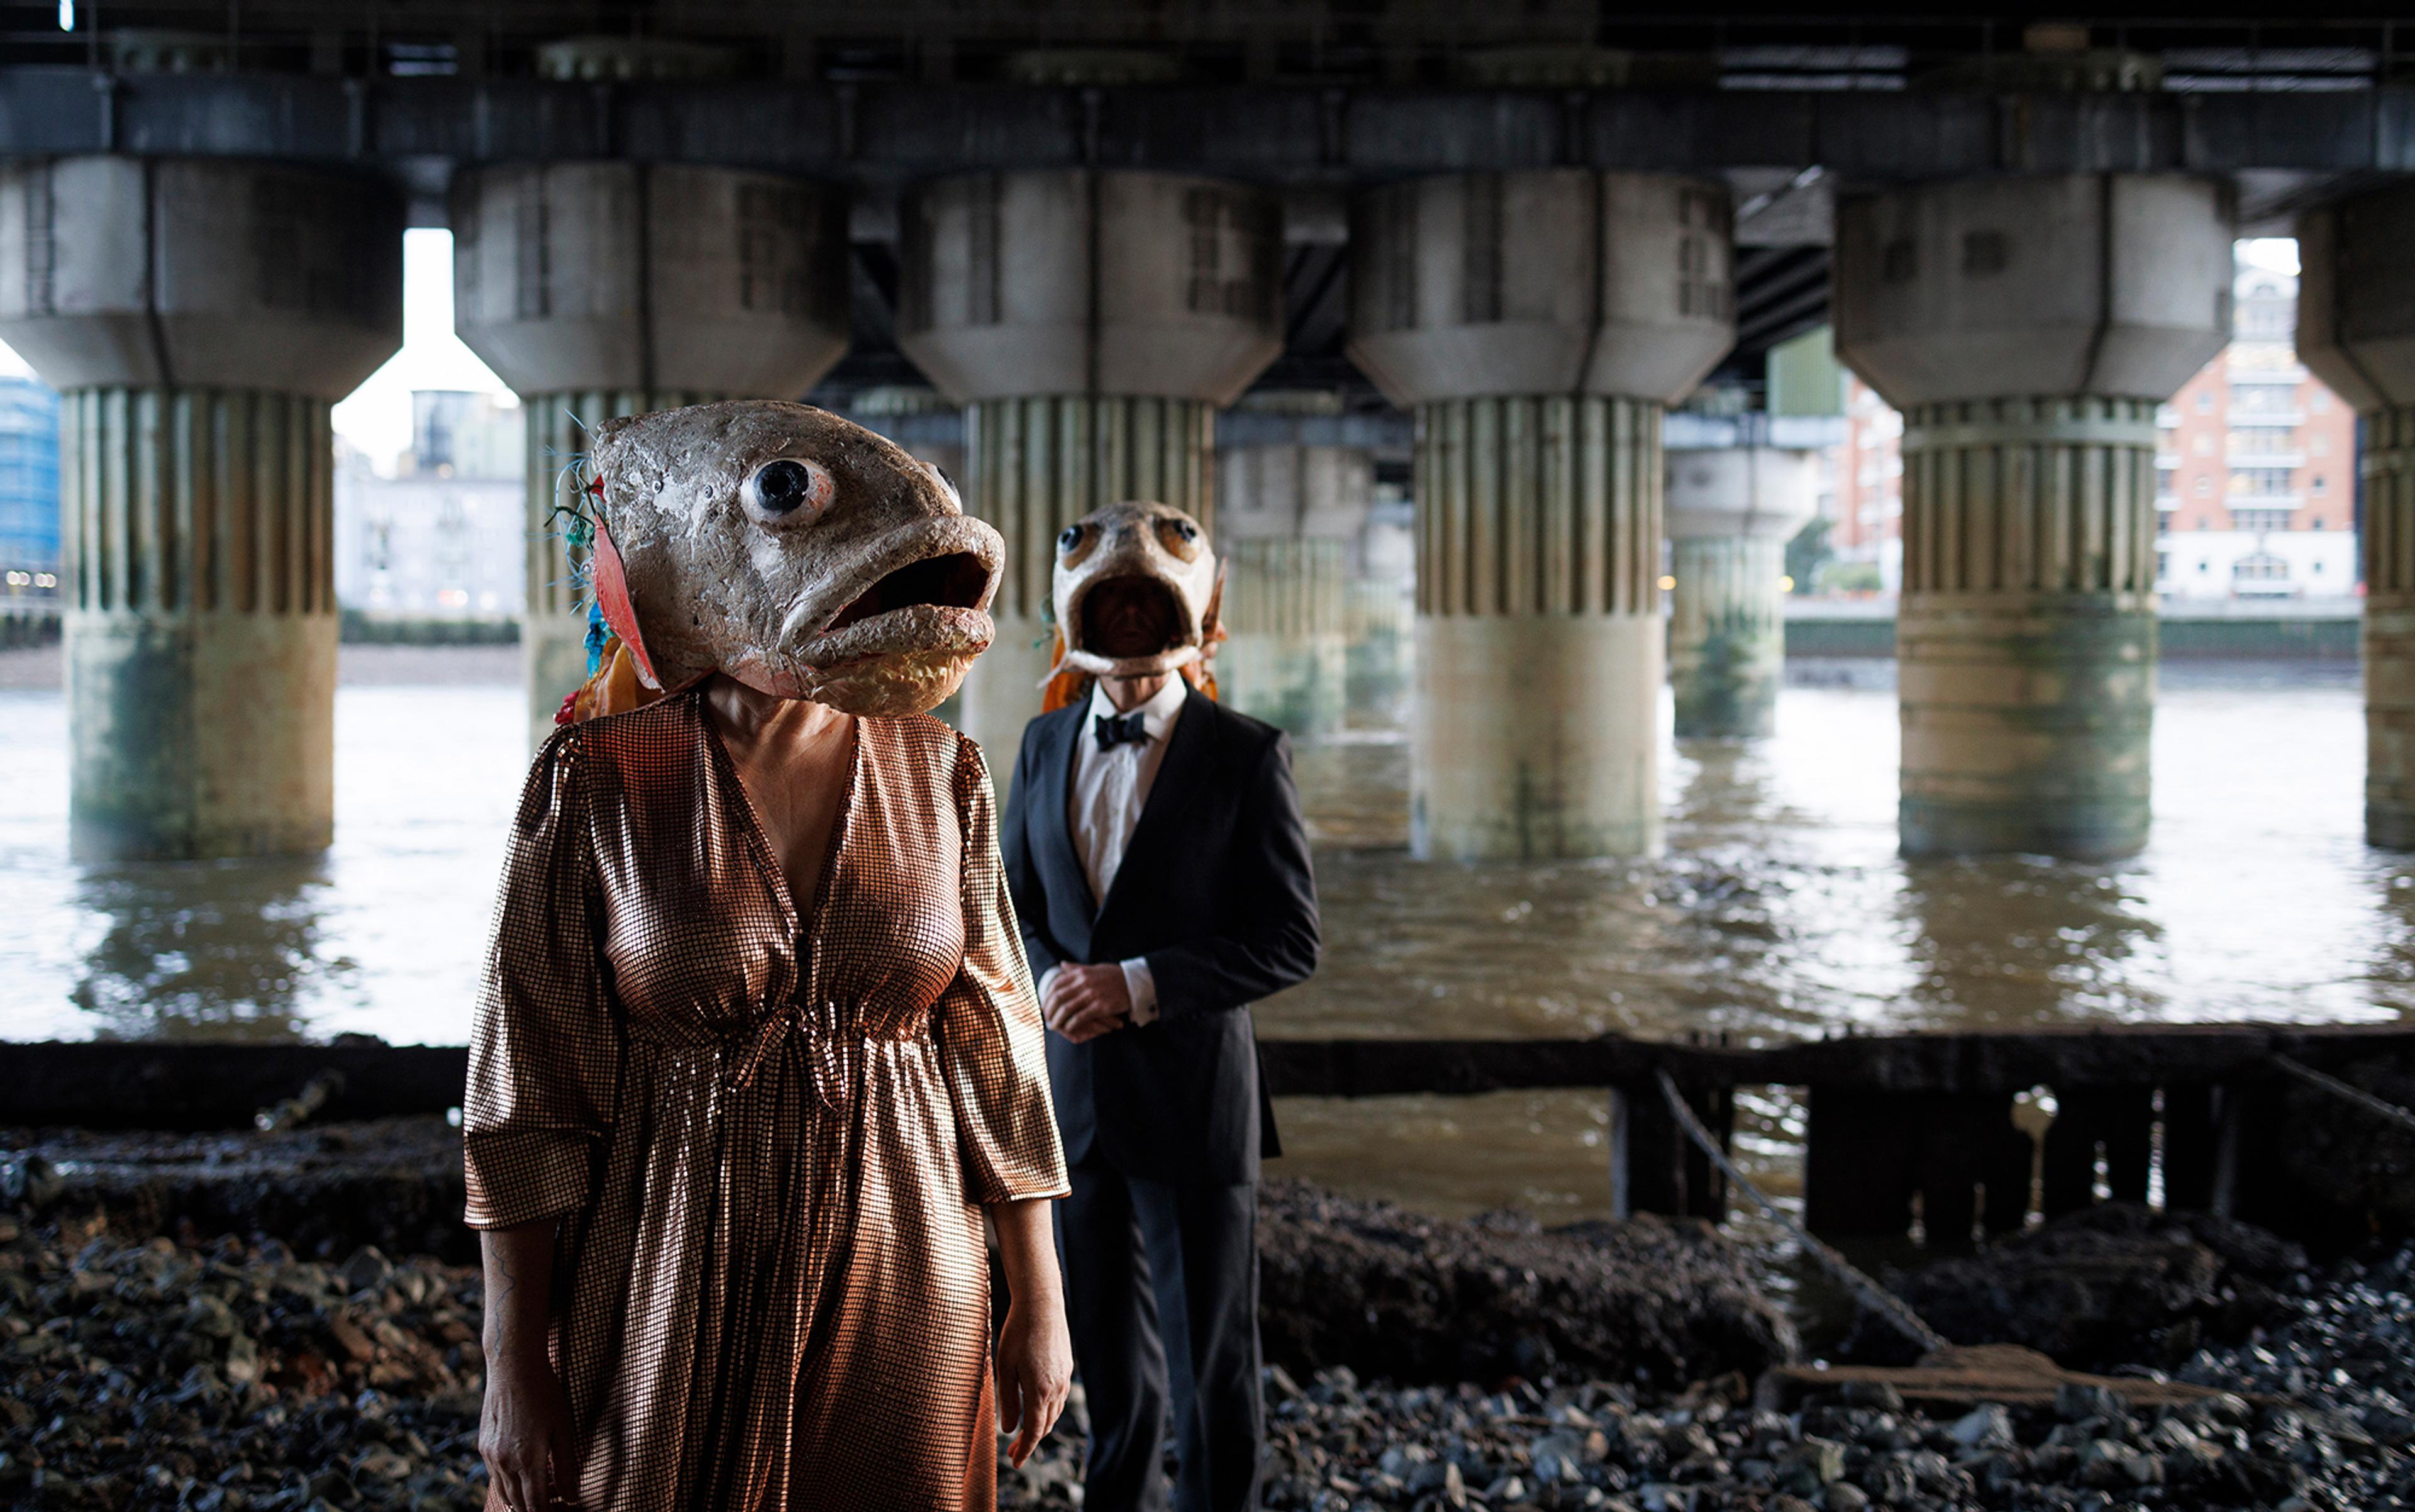 A man and a woman in formal evening dress but with giant fish heads covering their faces are pictured beneath a bridge on the foreshore of a river